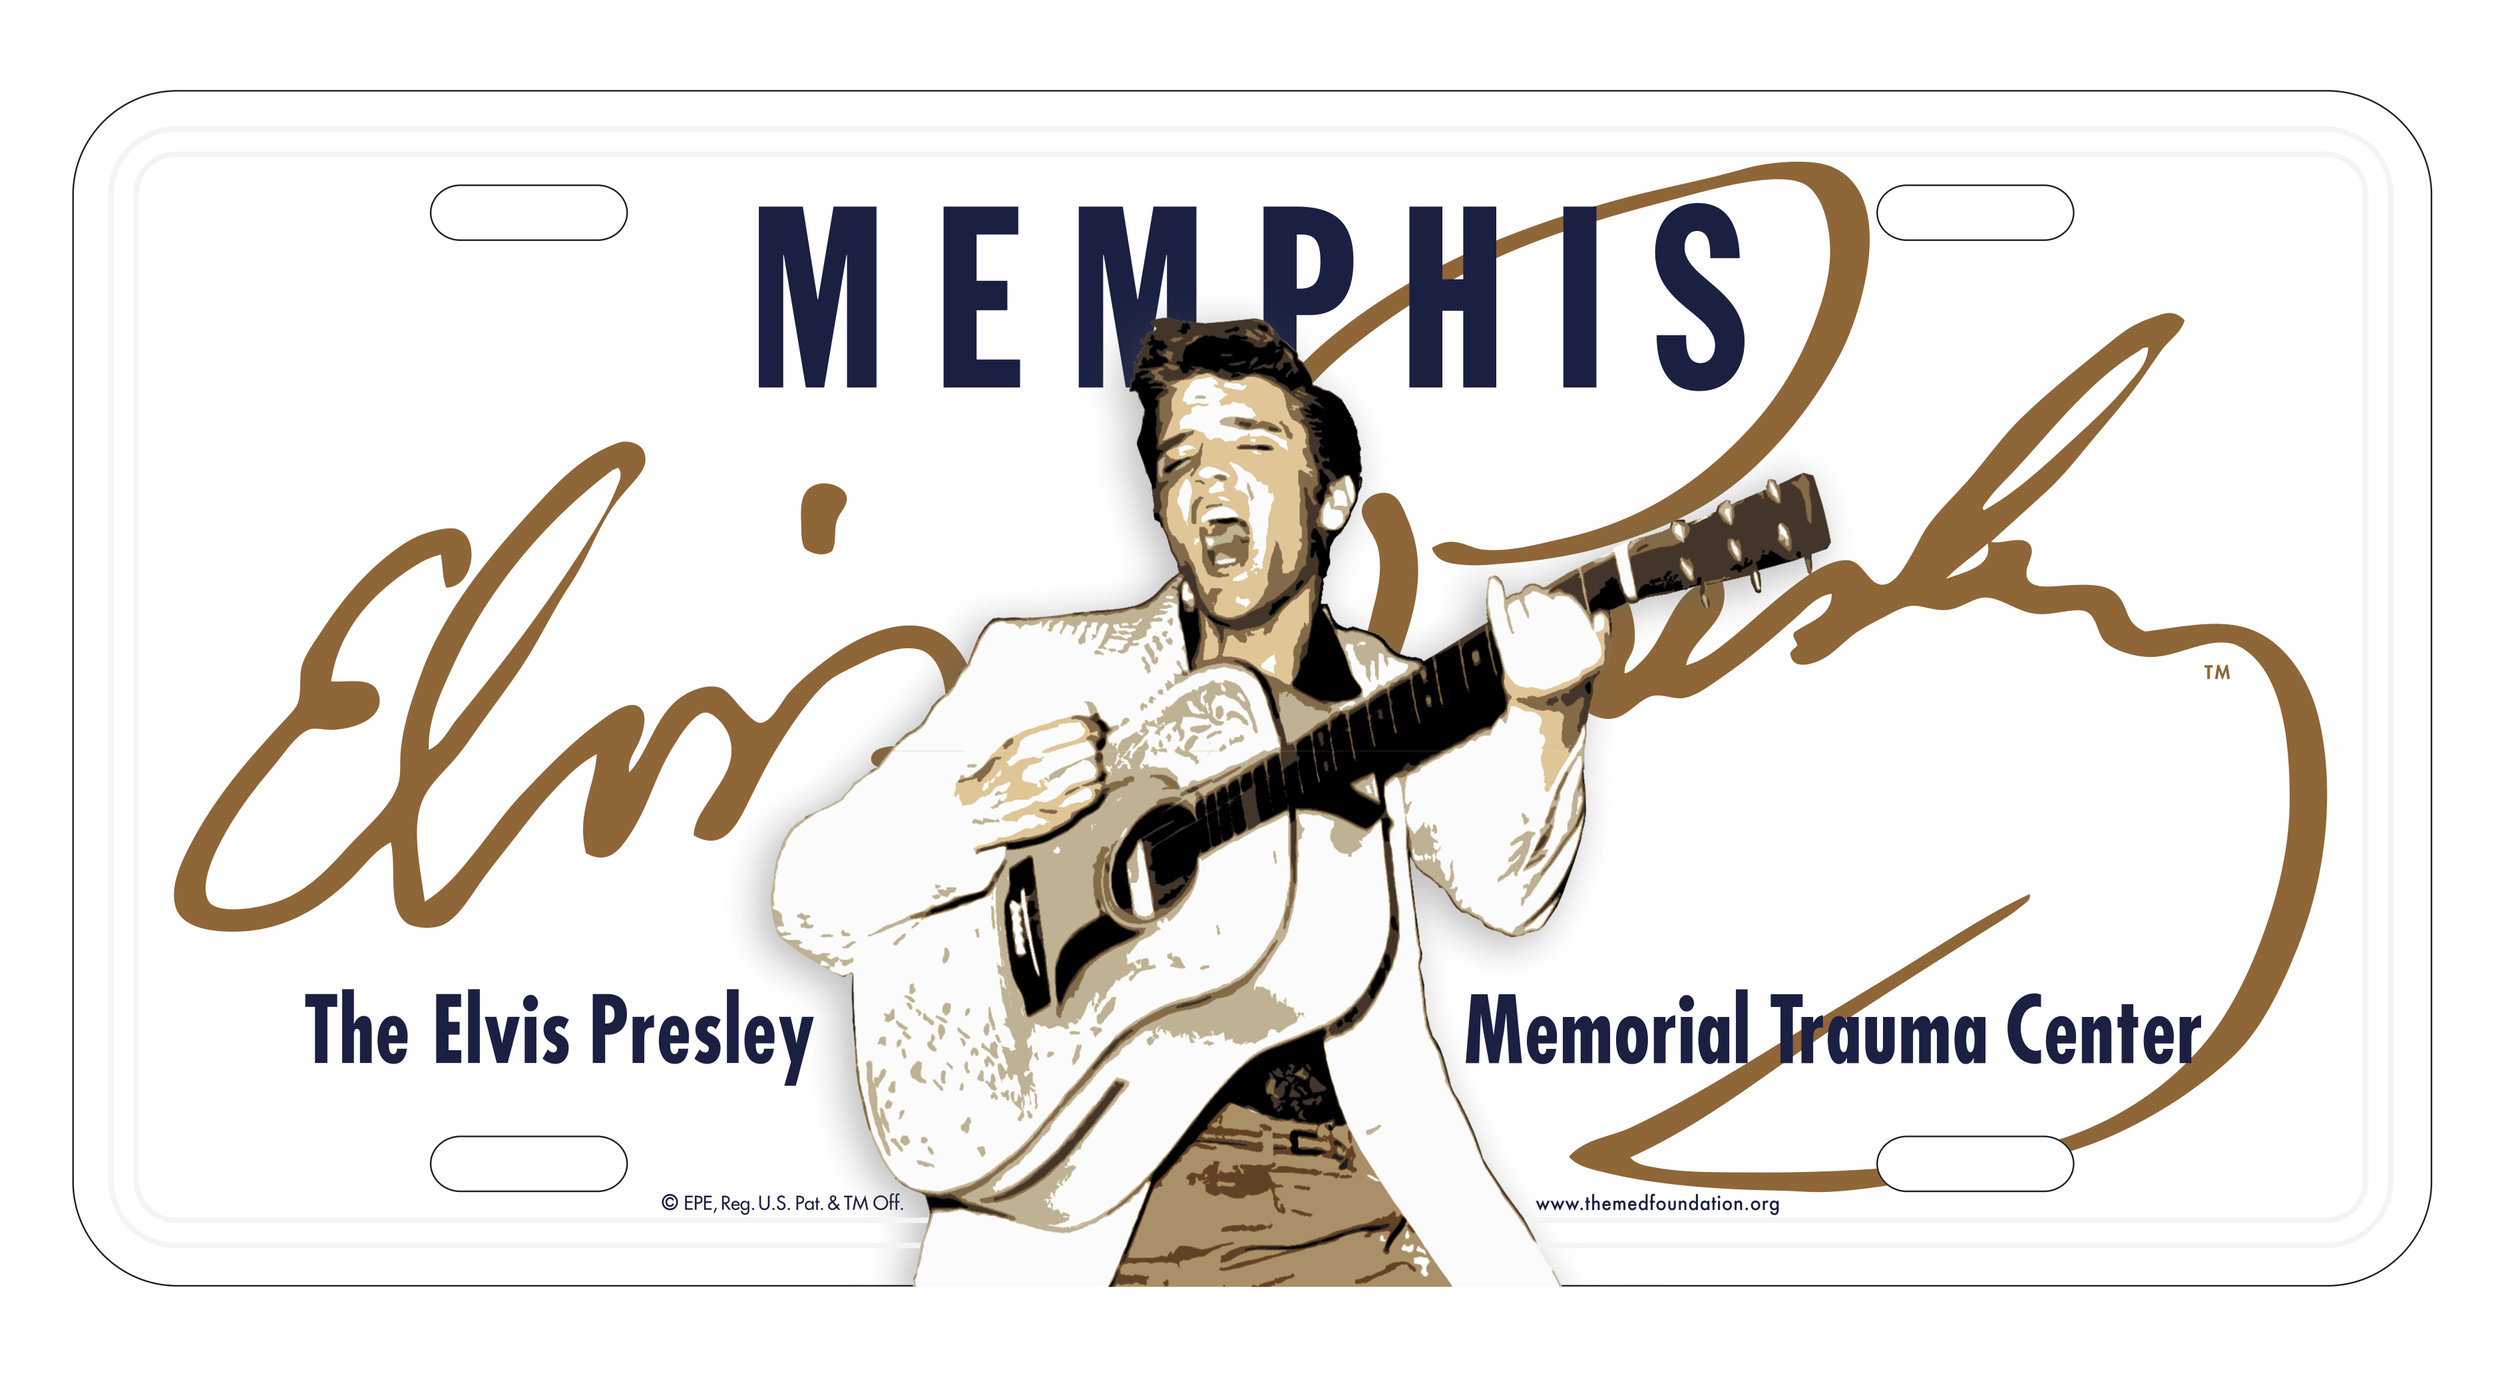  Elvis Presley Trauma Center specialty fundraiser front plate (Note: This fundraiser front plate is NOT an official registered State of Tennessee license plate)  Creative and design by Chuck Mitchell  Elvis Image ©EPE, Reg. U.S. Pat. &amp; TM Off. 